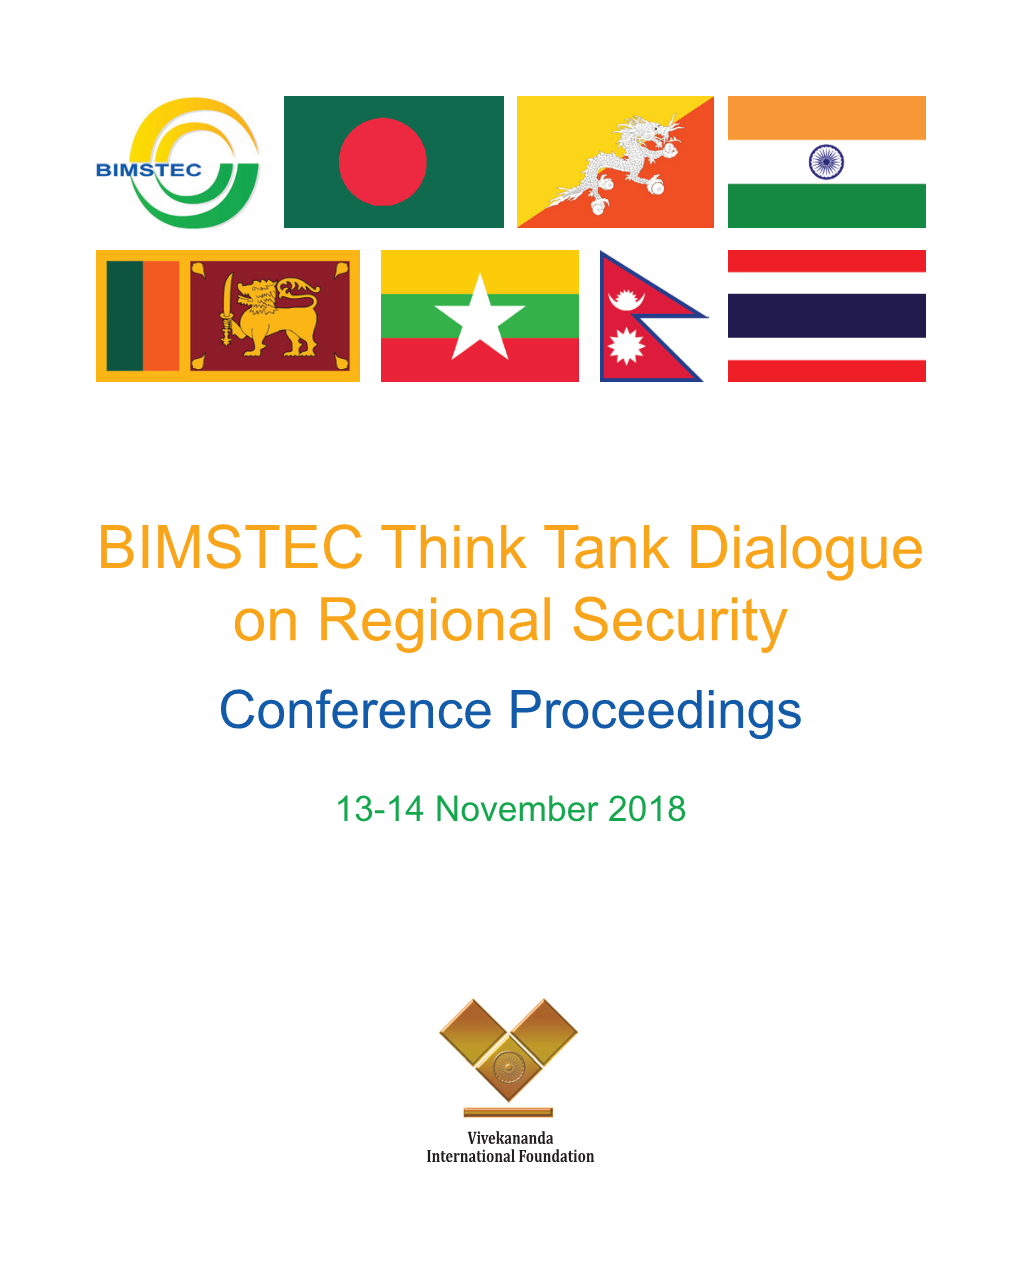 BIMSTEC Think Tank Dialogue on Regional Security Conference Proceedings